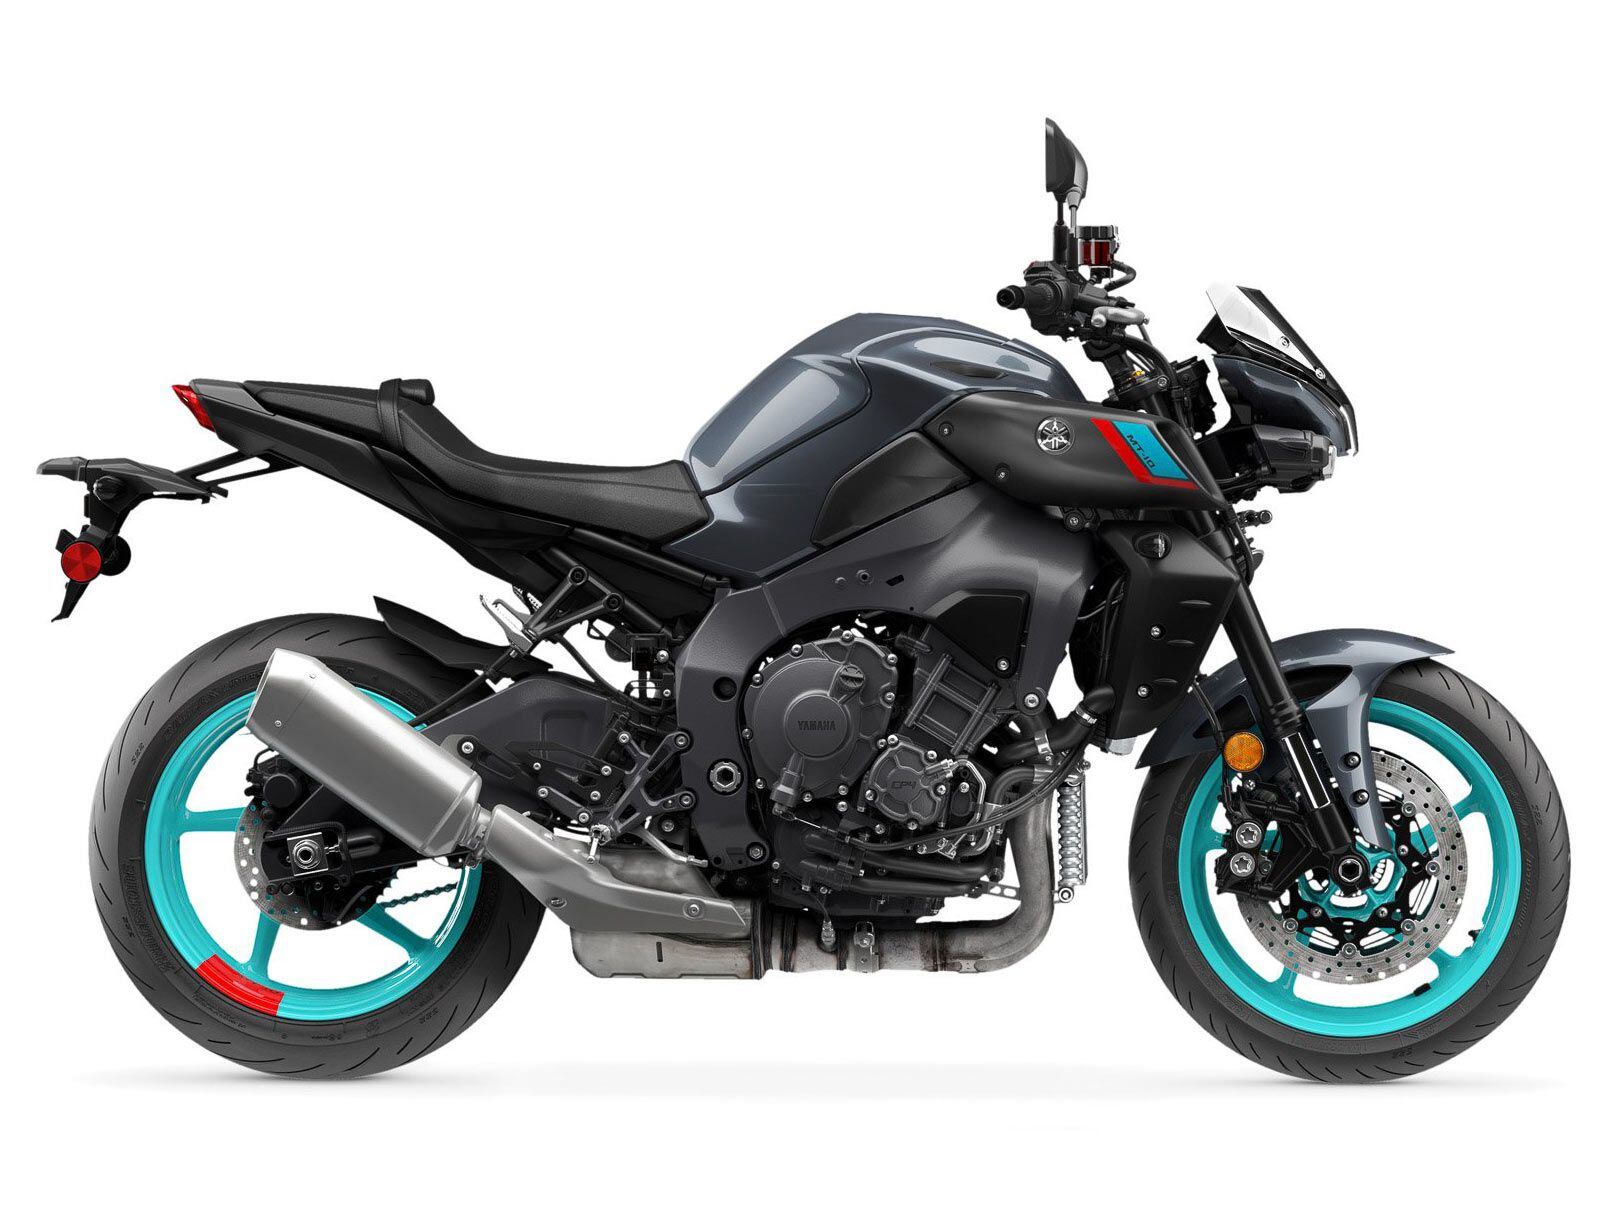 Yamaha’s MT-10 is designed for sport-riding enthusiasts who want their superbike-level performance in a comfortable, upright package.